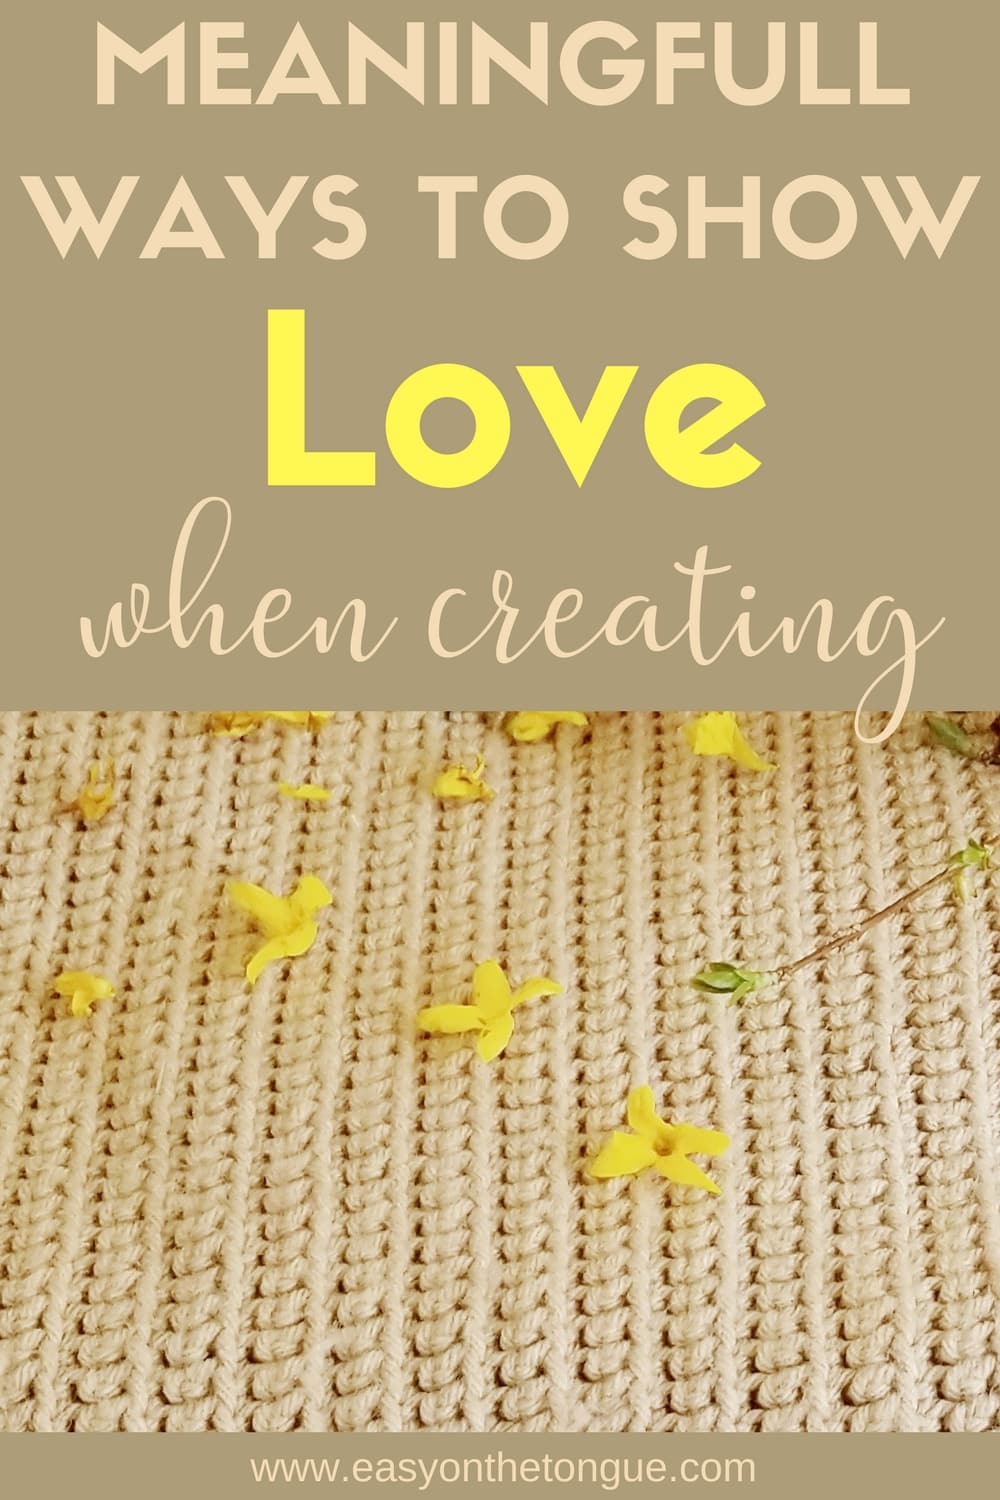 Meaningful ways to show love when creating 2 Meaningful Ways to Show Love when Creating